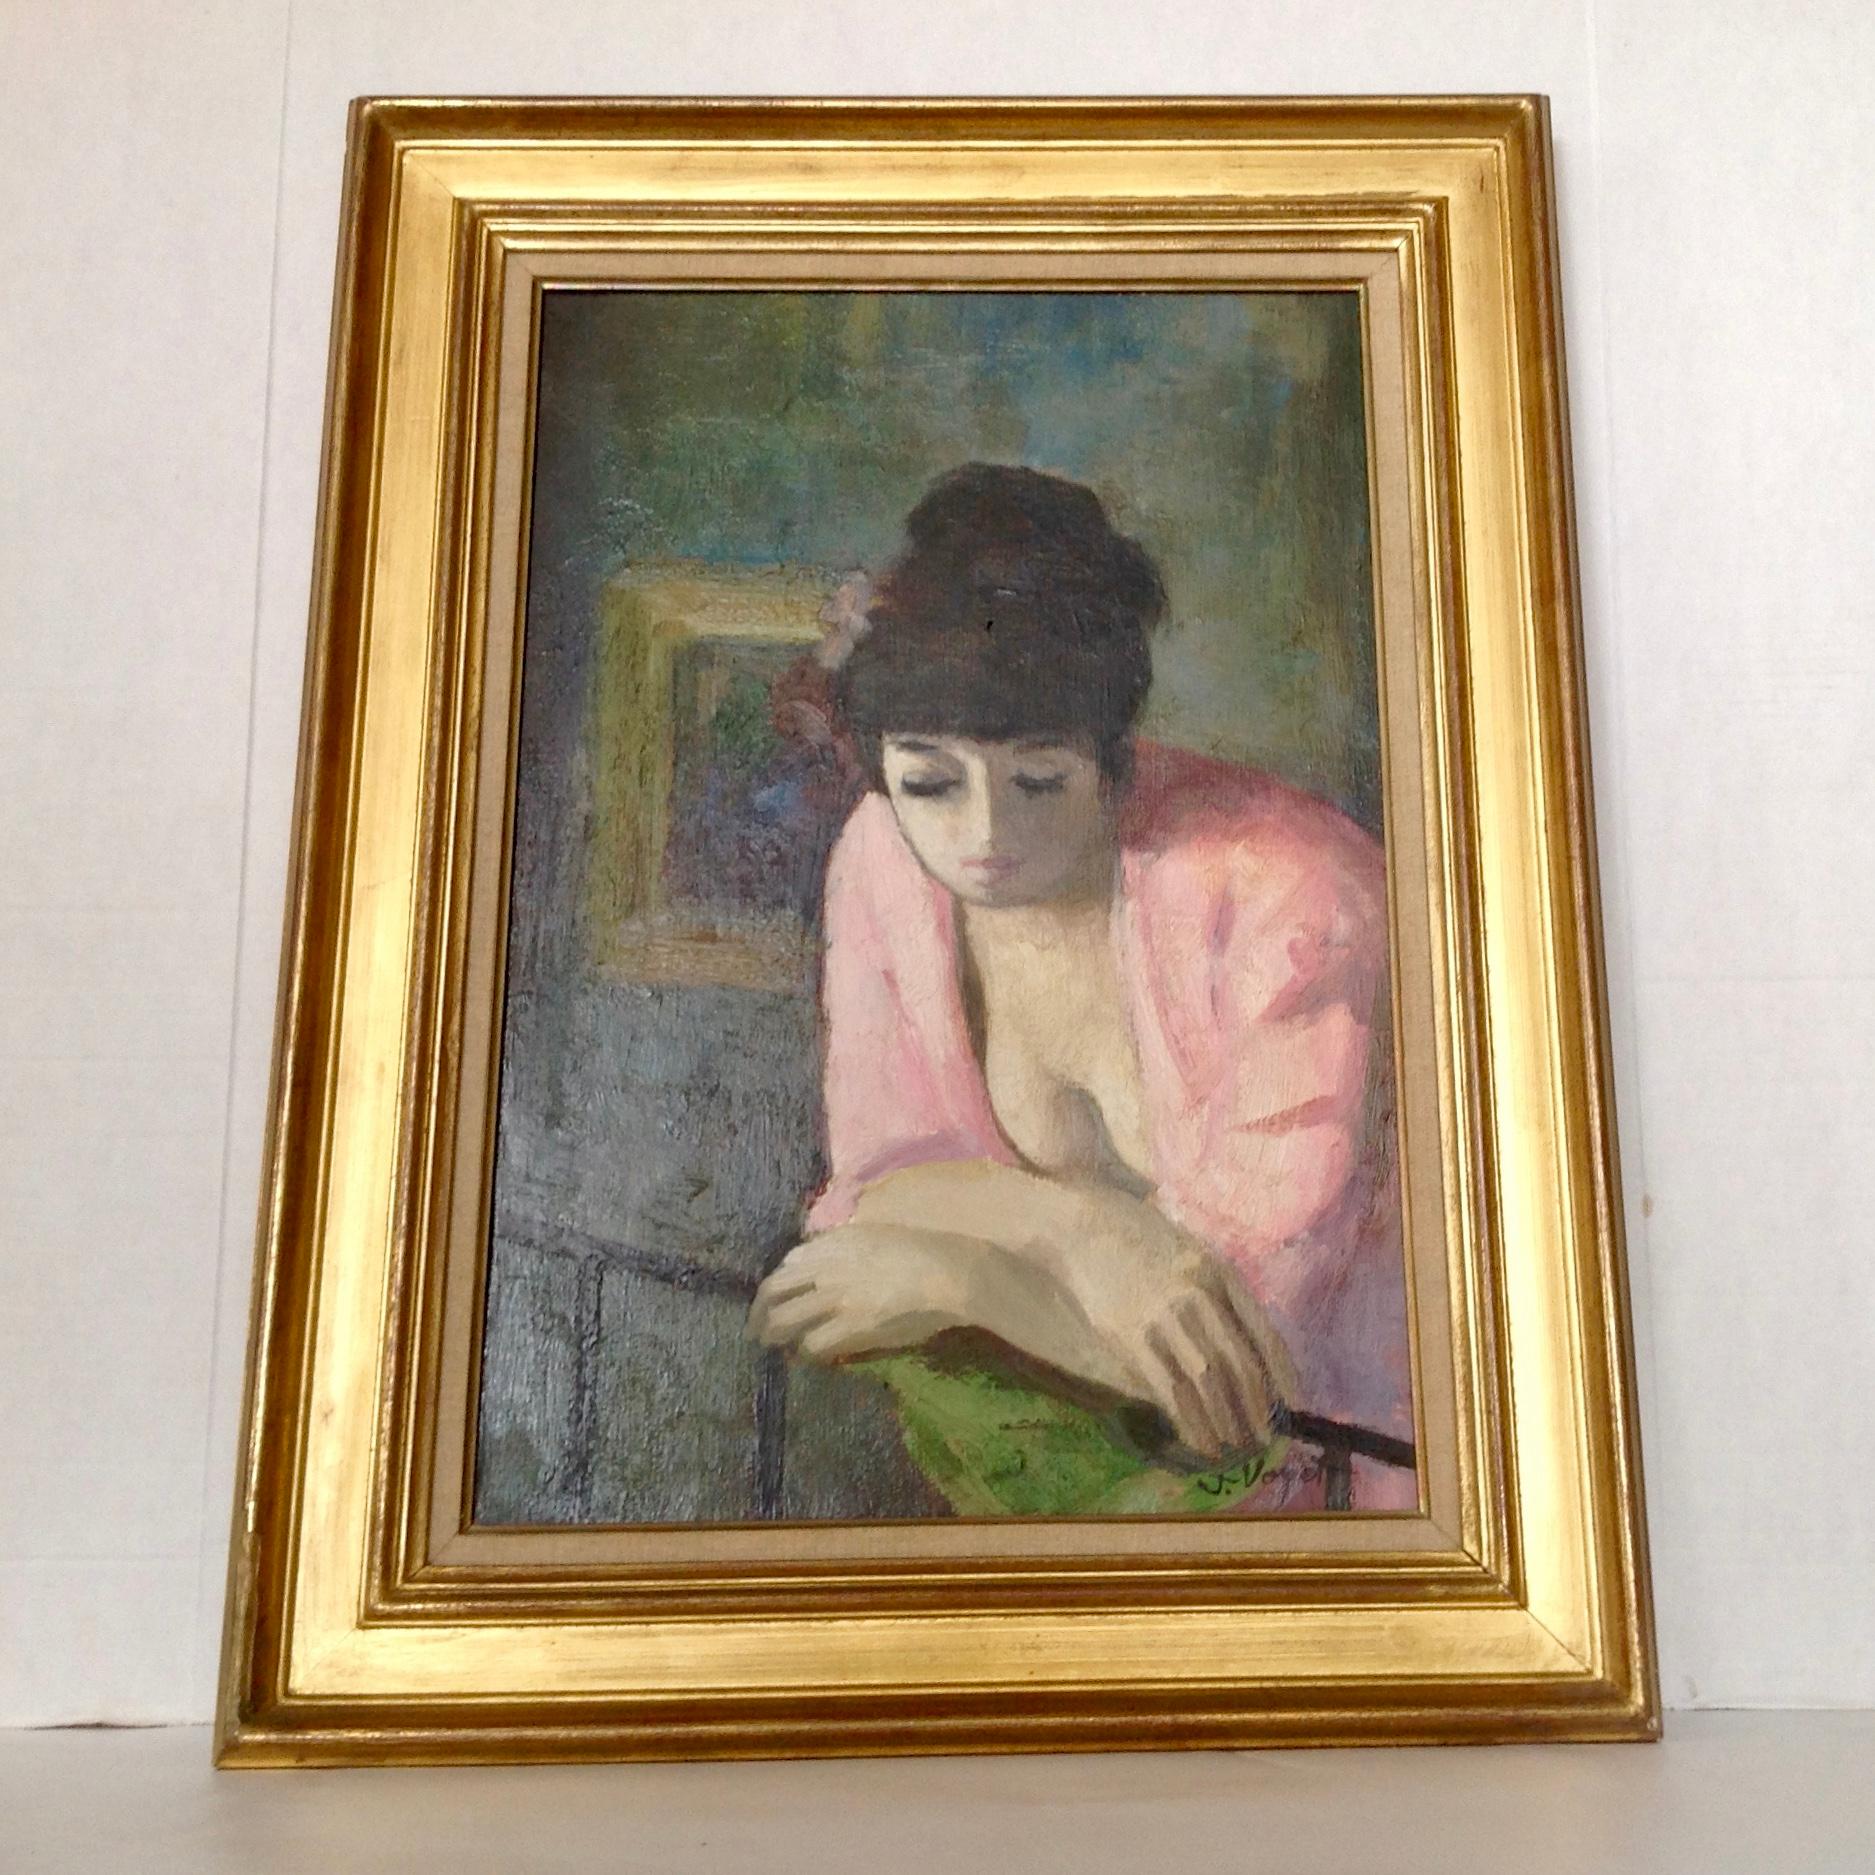 A fine study of a pensive young lady leaning on a railing and gazing downward.
The painting bears a label from ga lerie Stiebel 32 Ruede Seine, Paris.
Overall size with frame 21.5